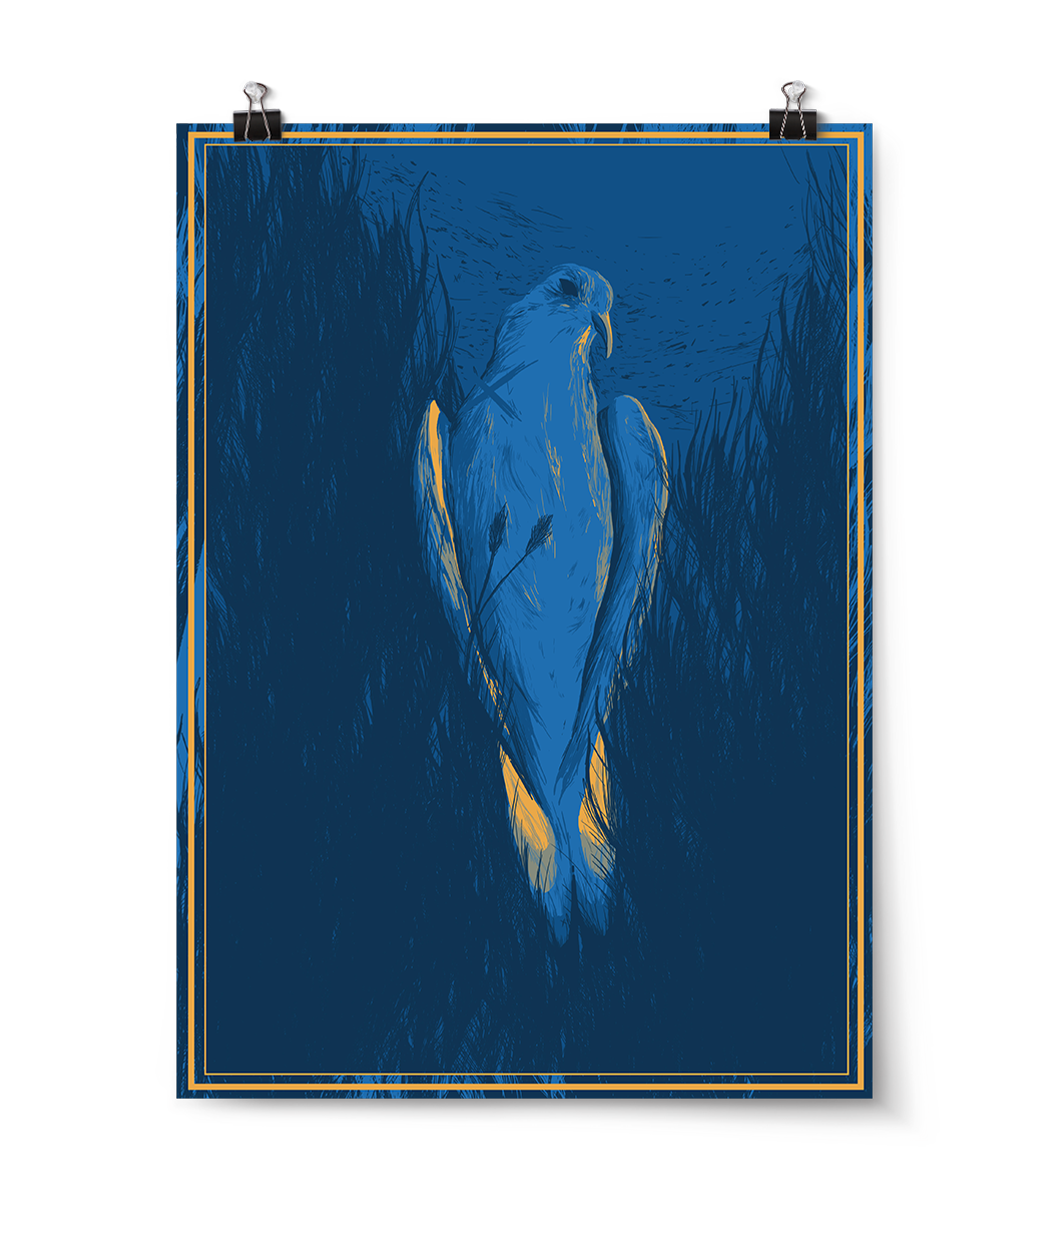 Vetical print of a monochrome blue bird in a monochrome blue environment. There are orange highlights on the bird and two orange borders surrounding the scene - from Tyler Thrasher